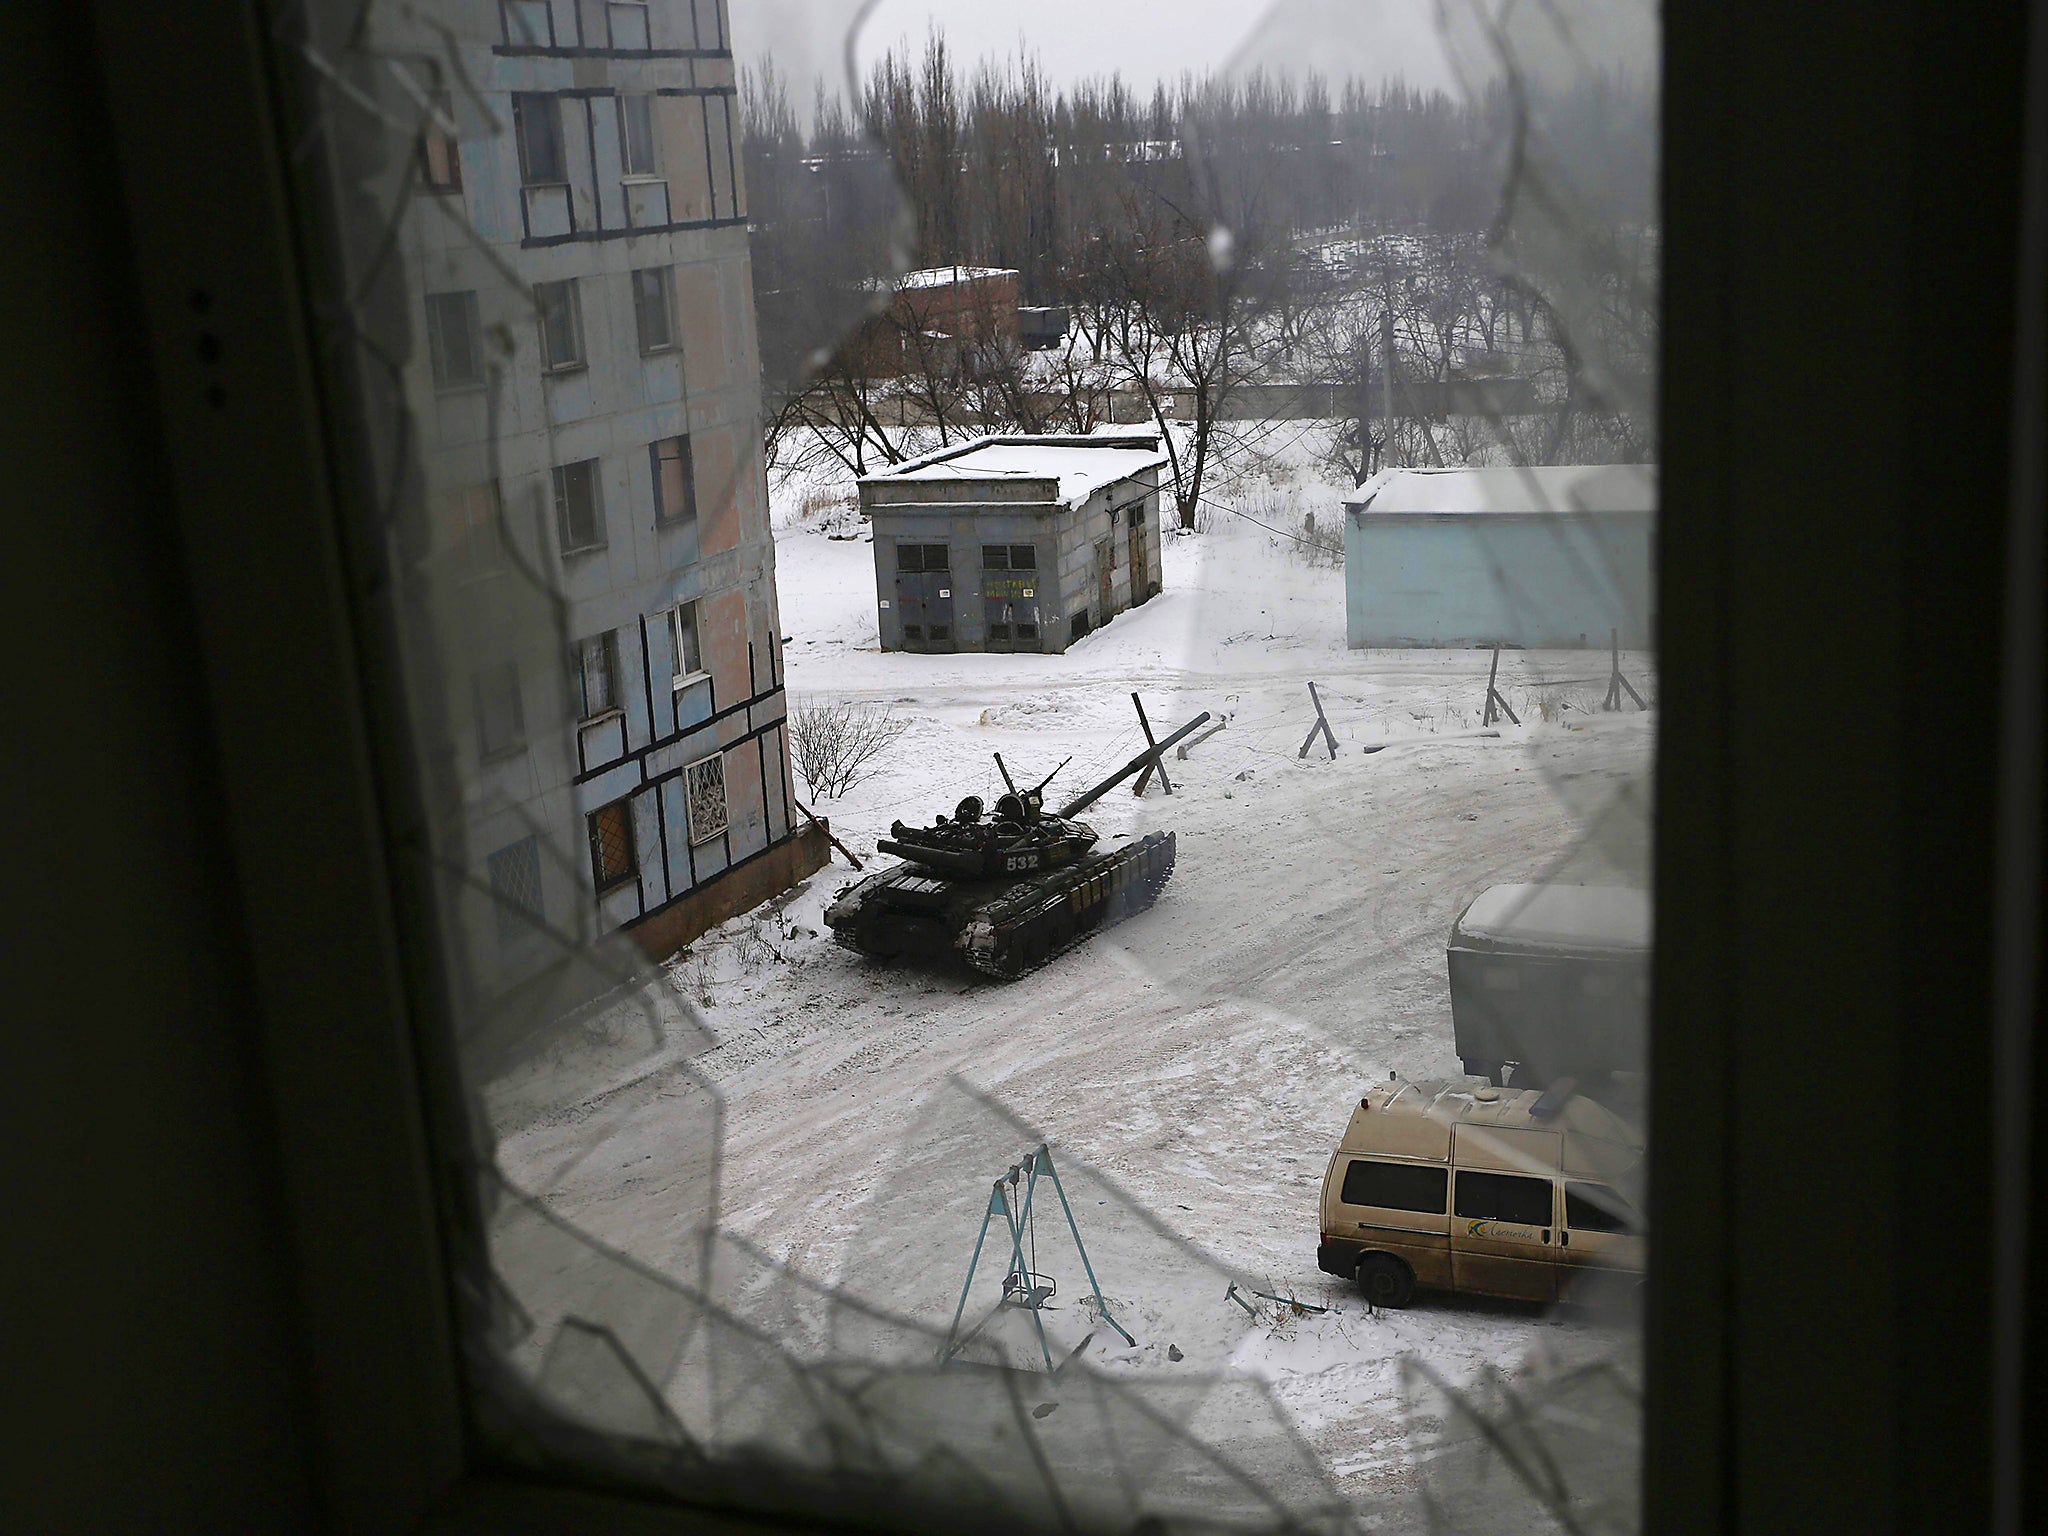 A tank from the Ukrainian Forces is stationed outside a building in the flashpoint eastern town of Avdiivka that sits just north of the pro-Russian rebels' de facto capital of Donetsk